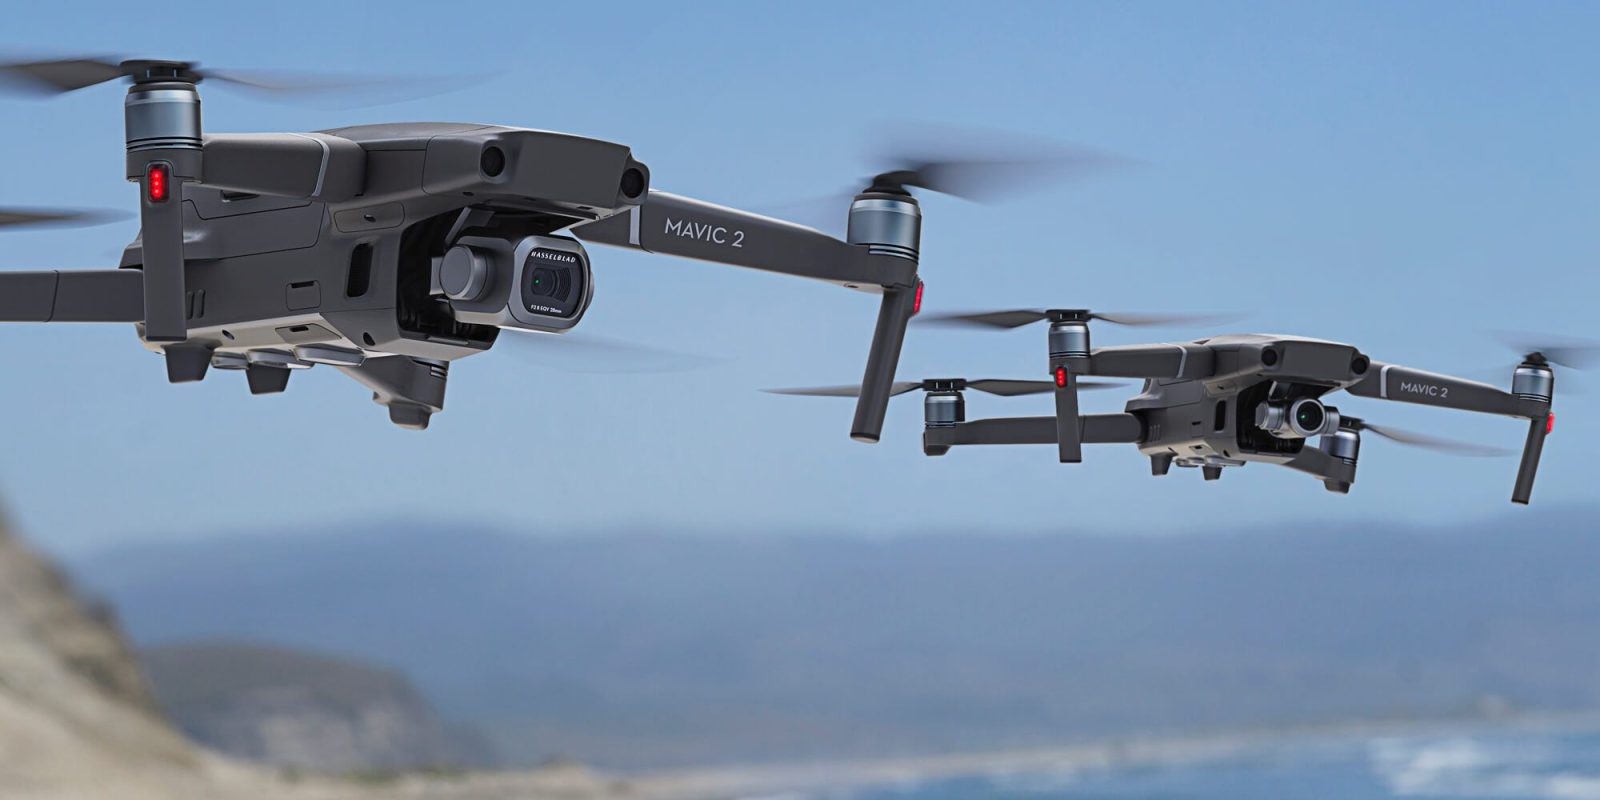 DJI drone update: Spark, Mavic Air and Mavic 2 higher prices and limited availability